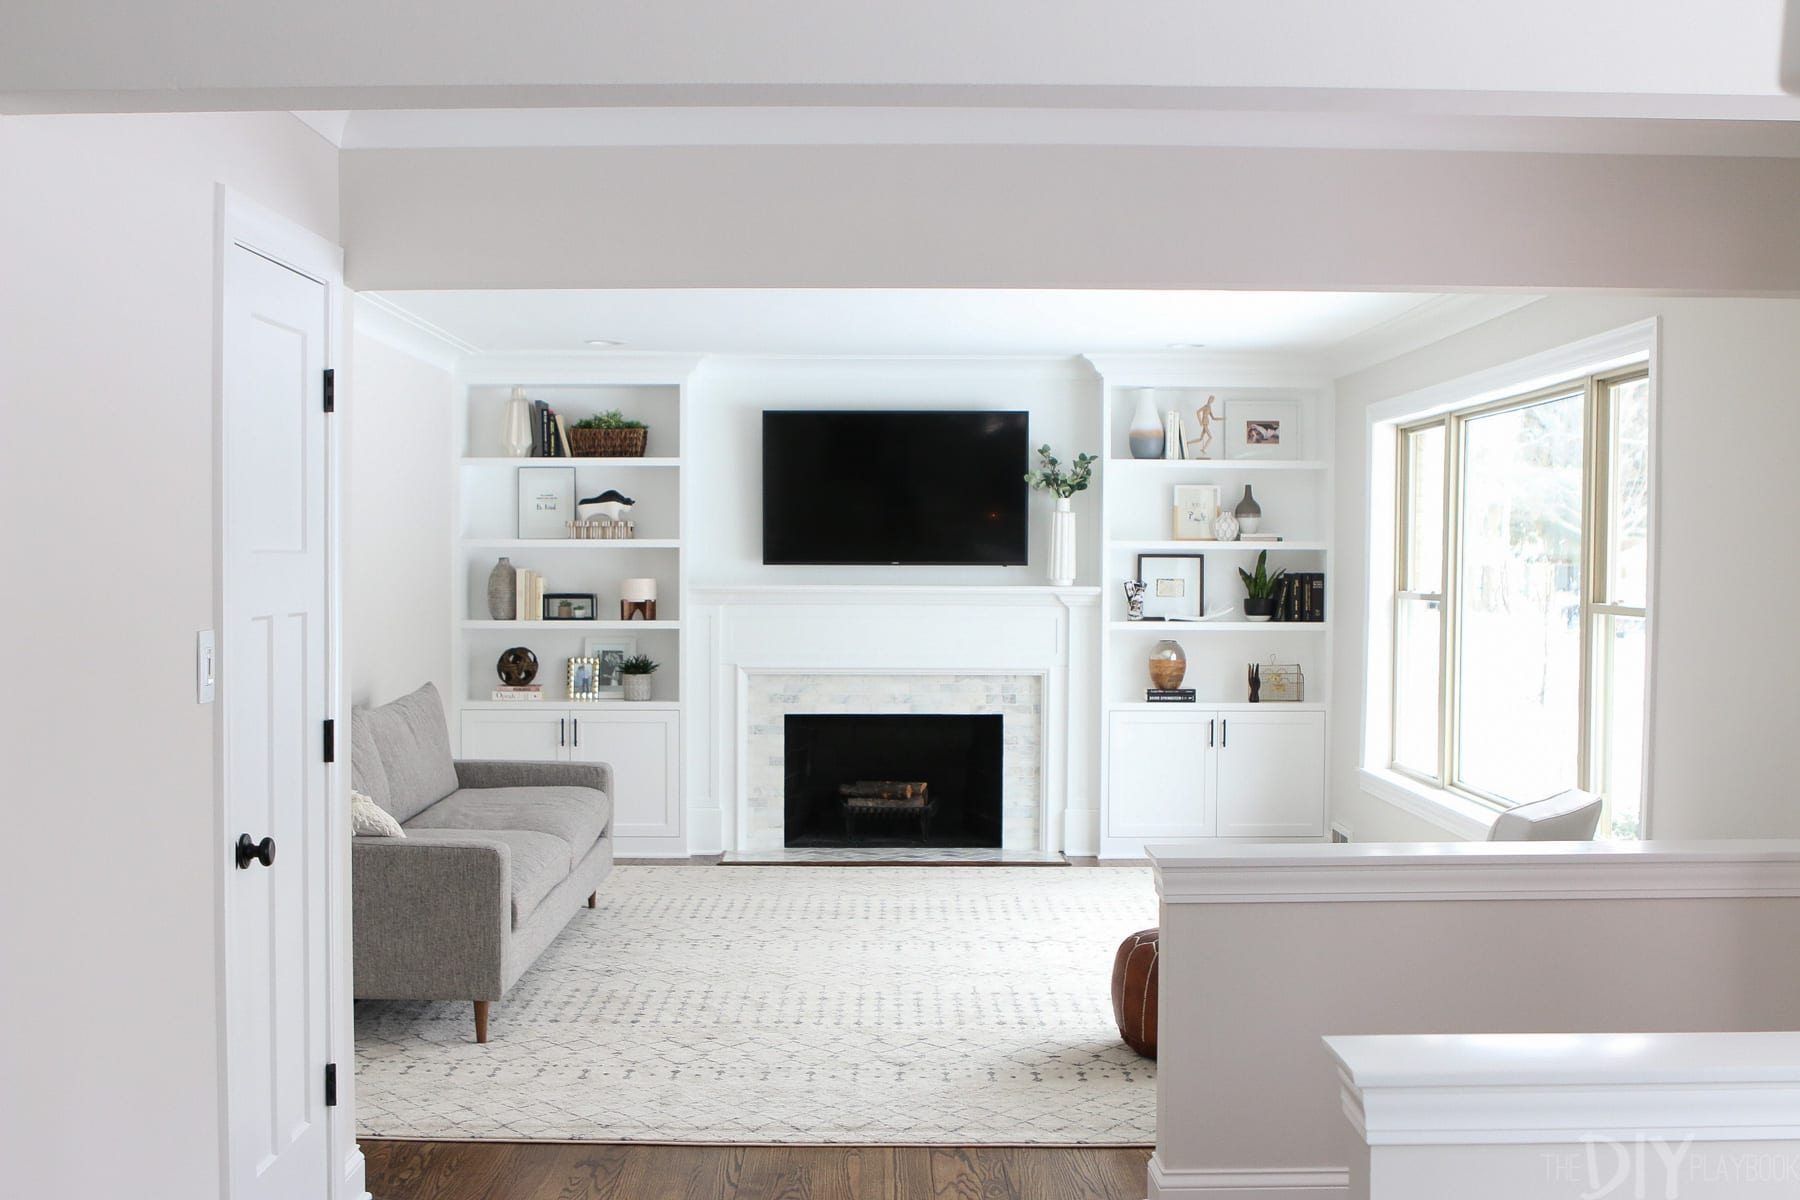 White Built Ins Around The Fireplace, Pictures Of Bookcases Beside Fireplaces